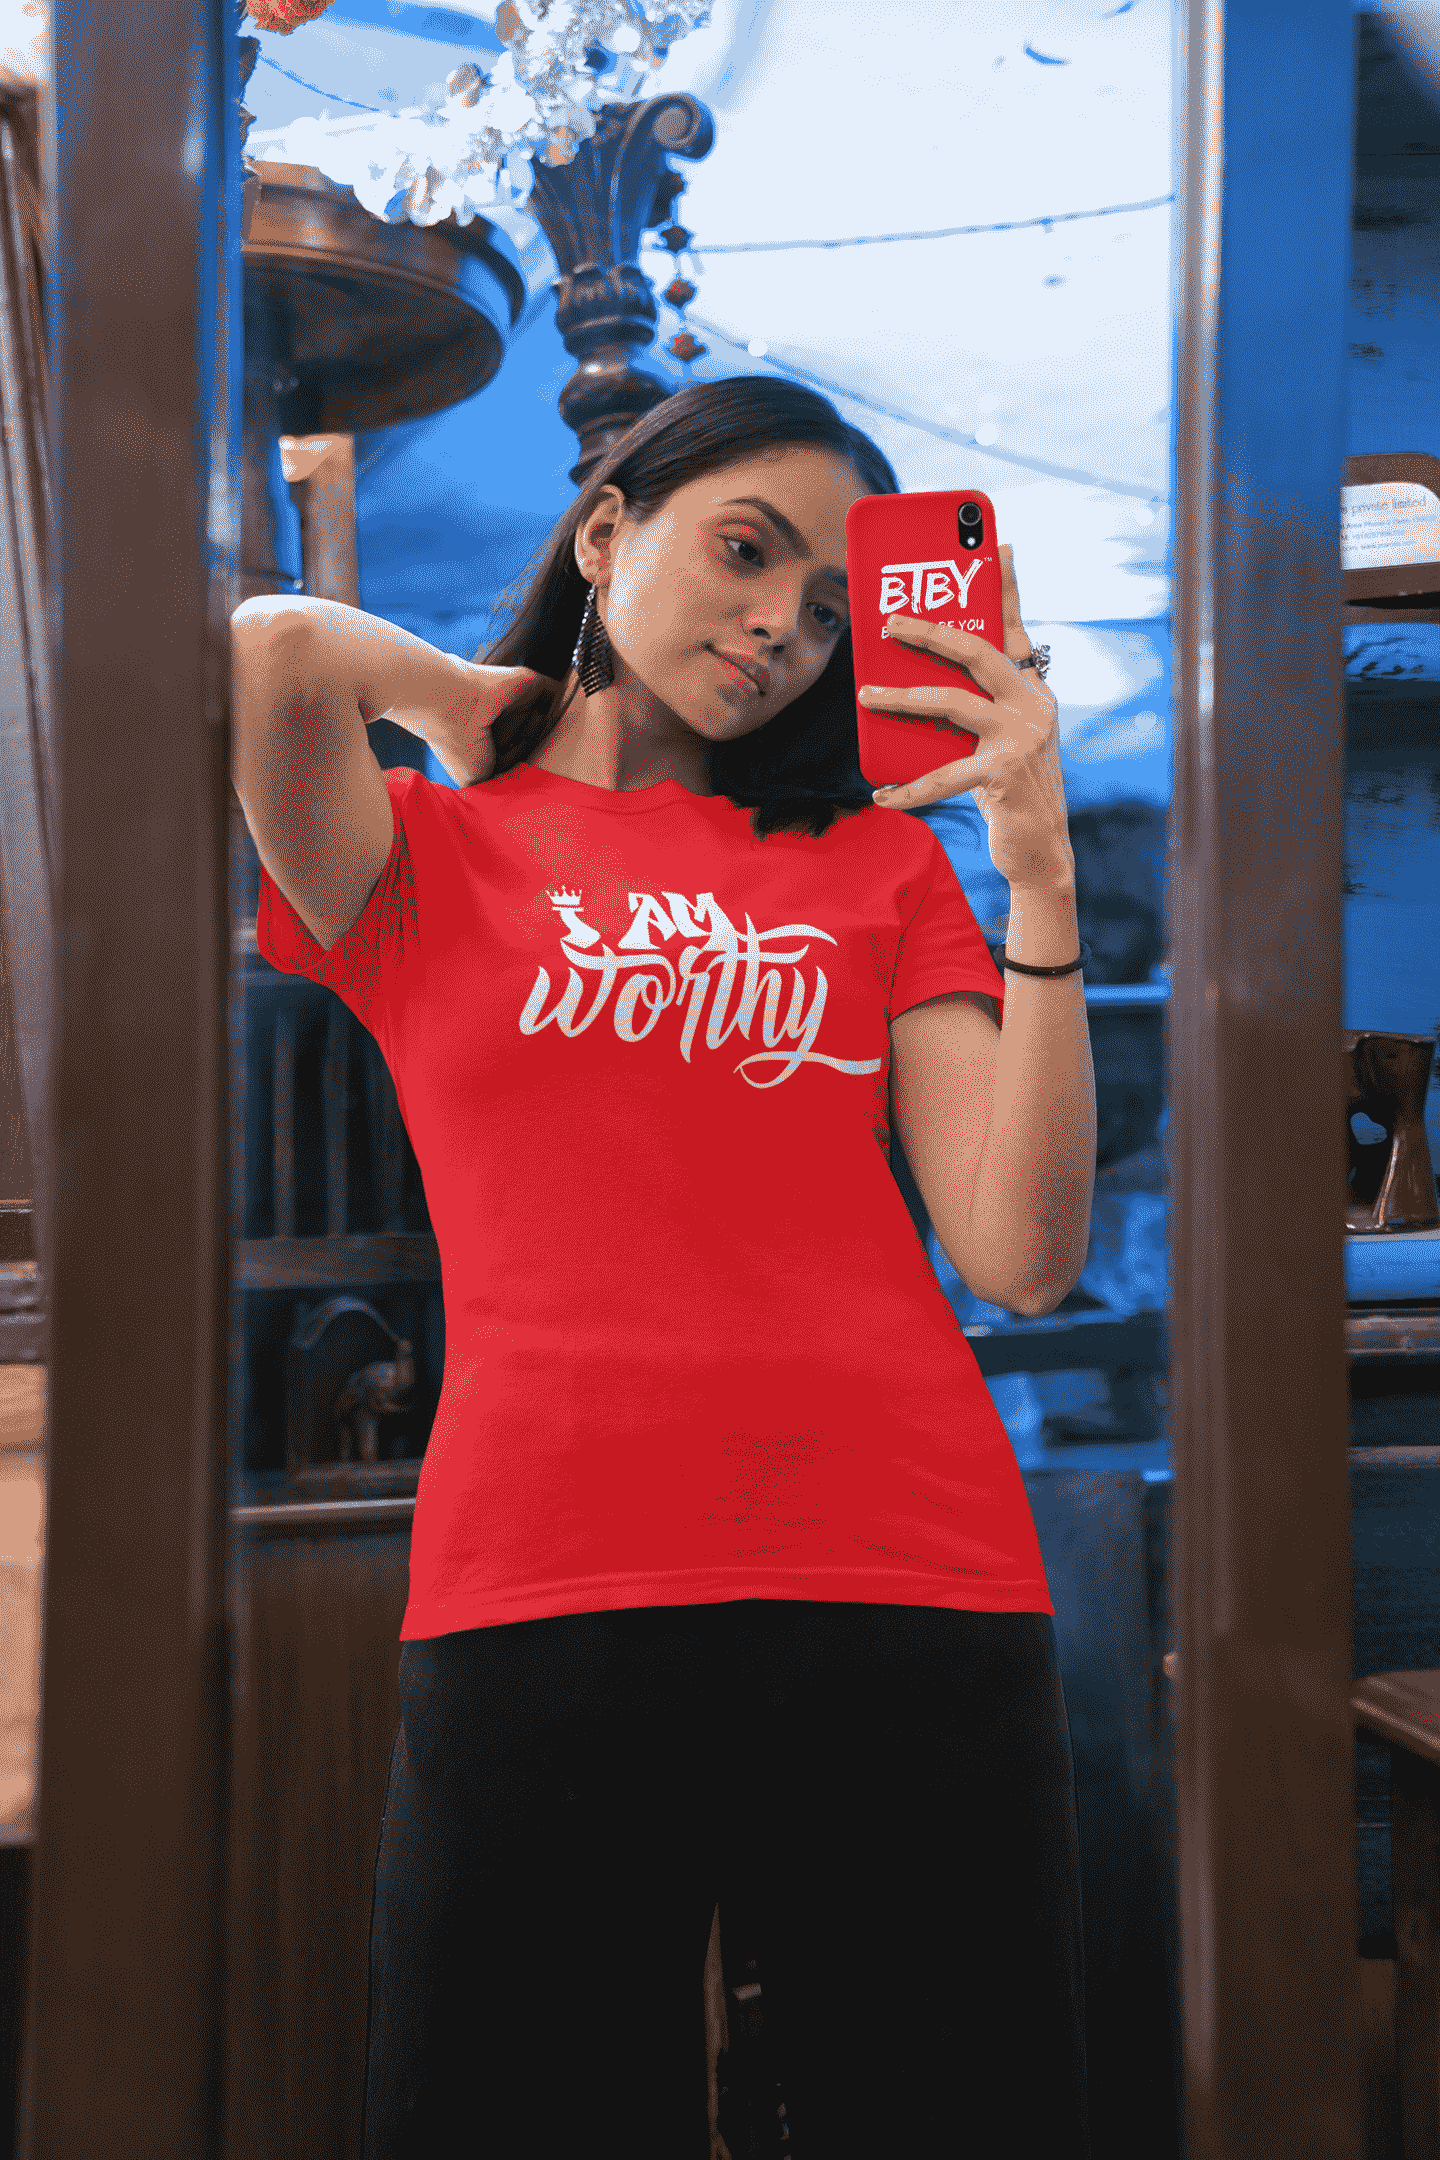 selfie-themed-mockup-featuring-a-woman-wearing-a-gildan-tee-and-holding-a-mobile-with-a-phone-case-m31414-min